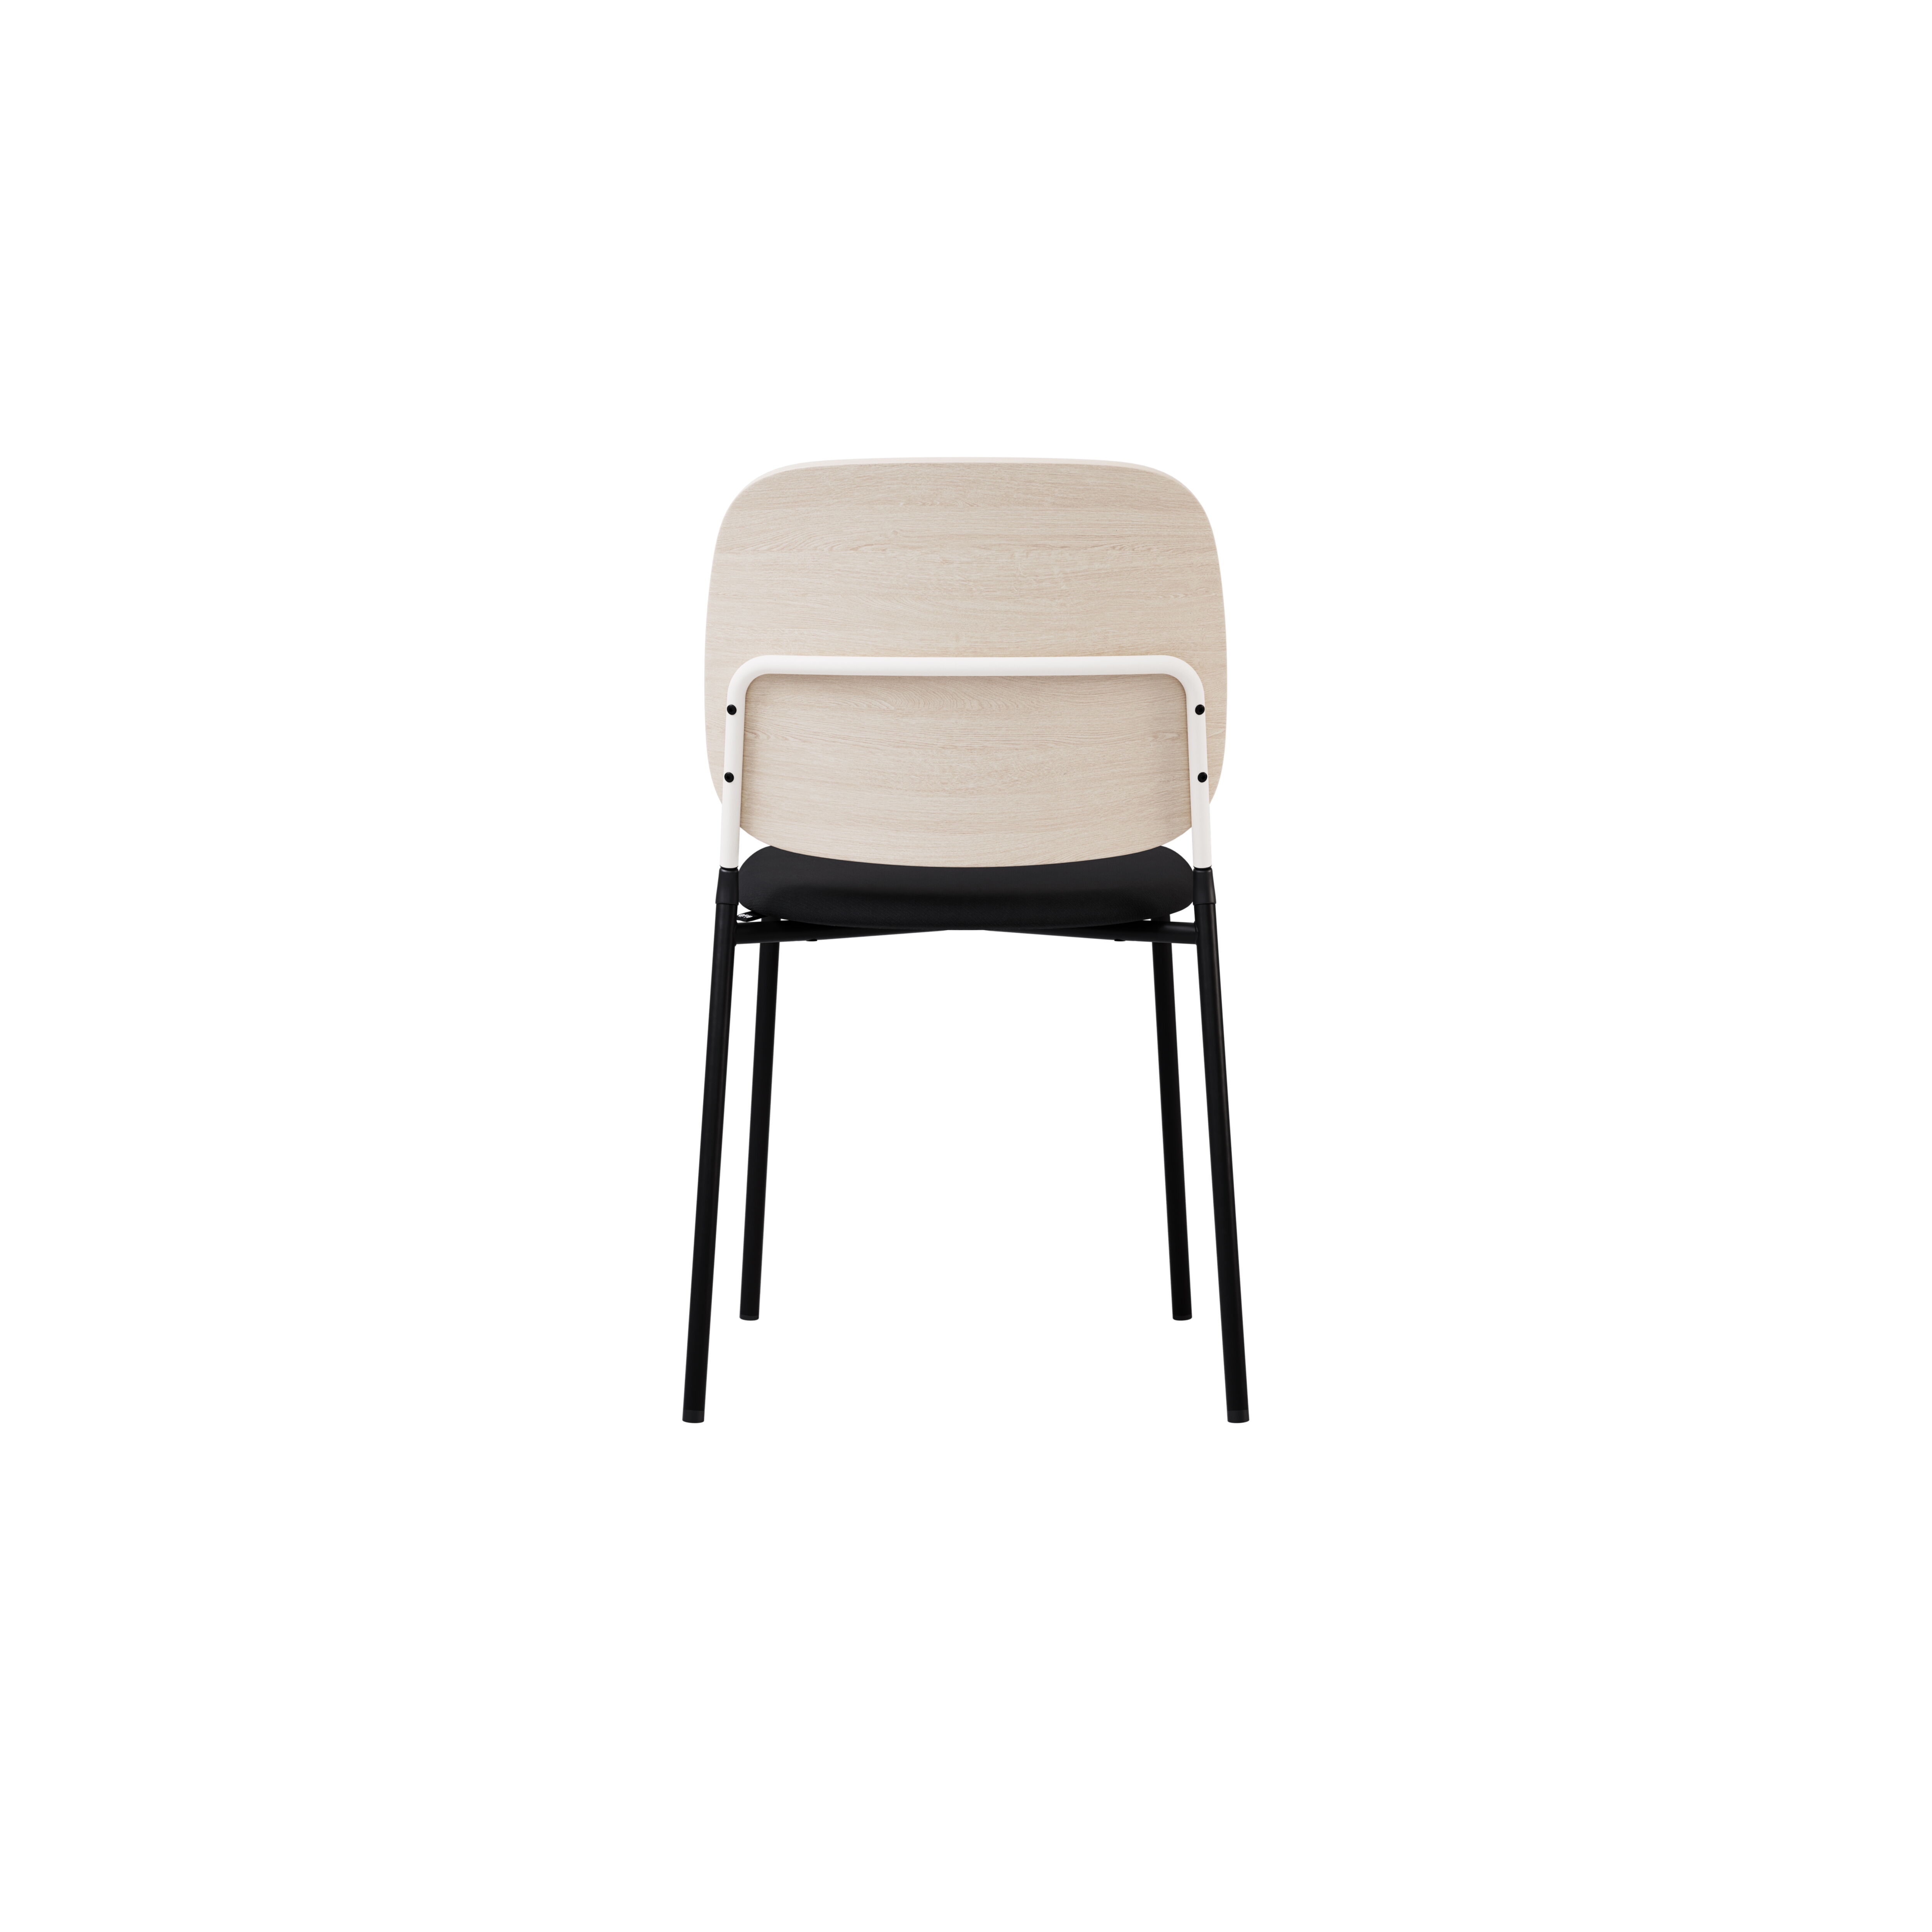 Bow Chair with metal legs product image 10